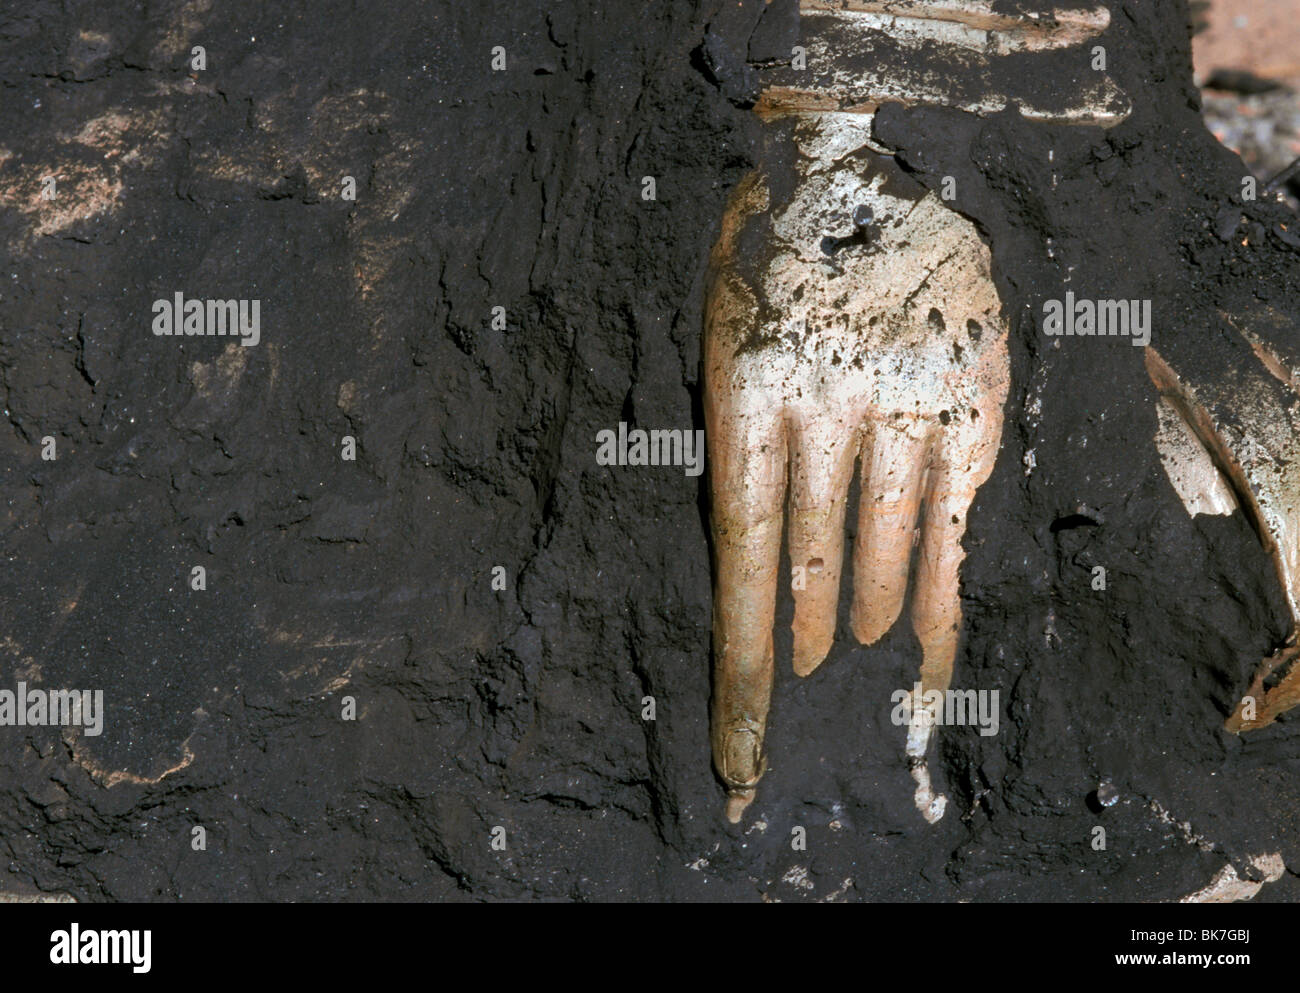 The hand of the Buddha emerging from the ashes, bronze casting, Mandalay, Myanmar (Burma), Asia Stock Photo